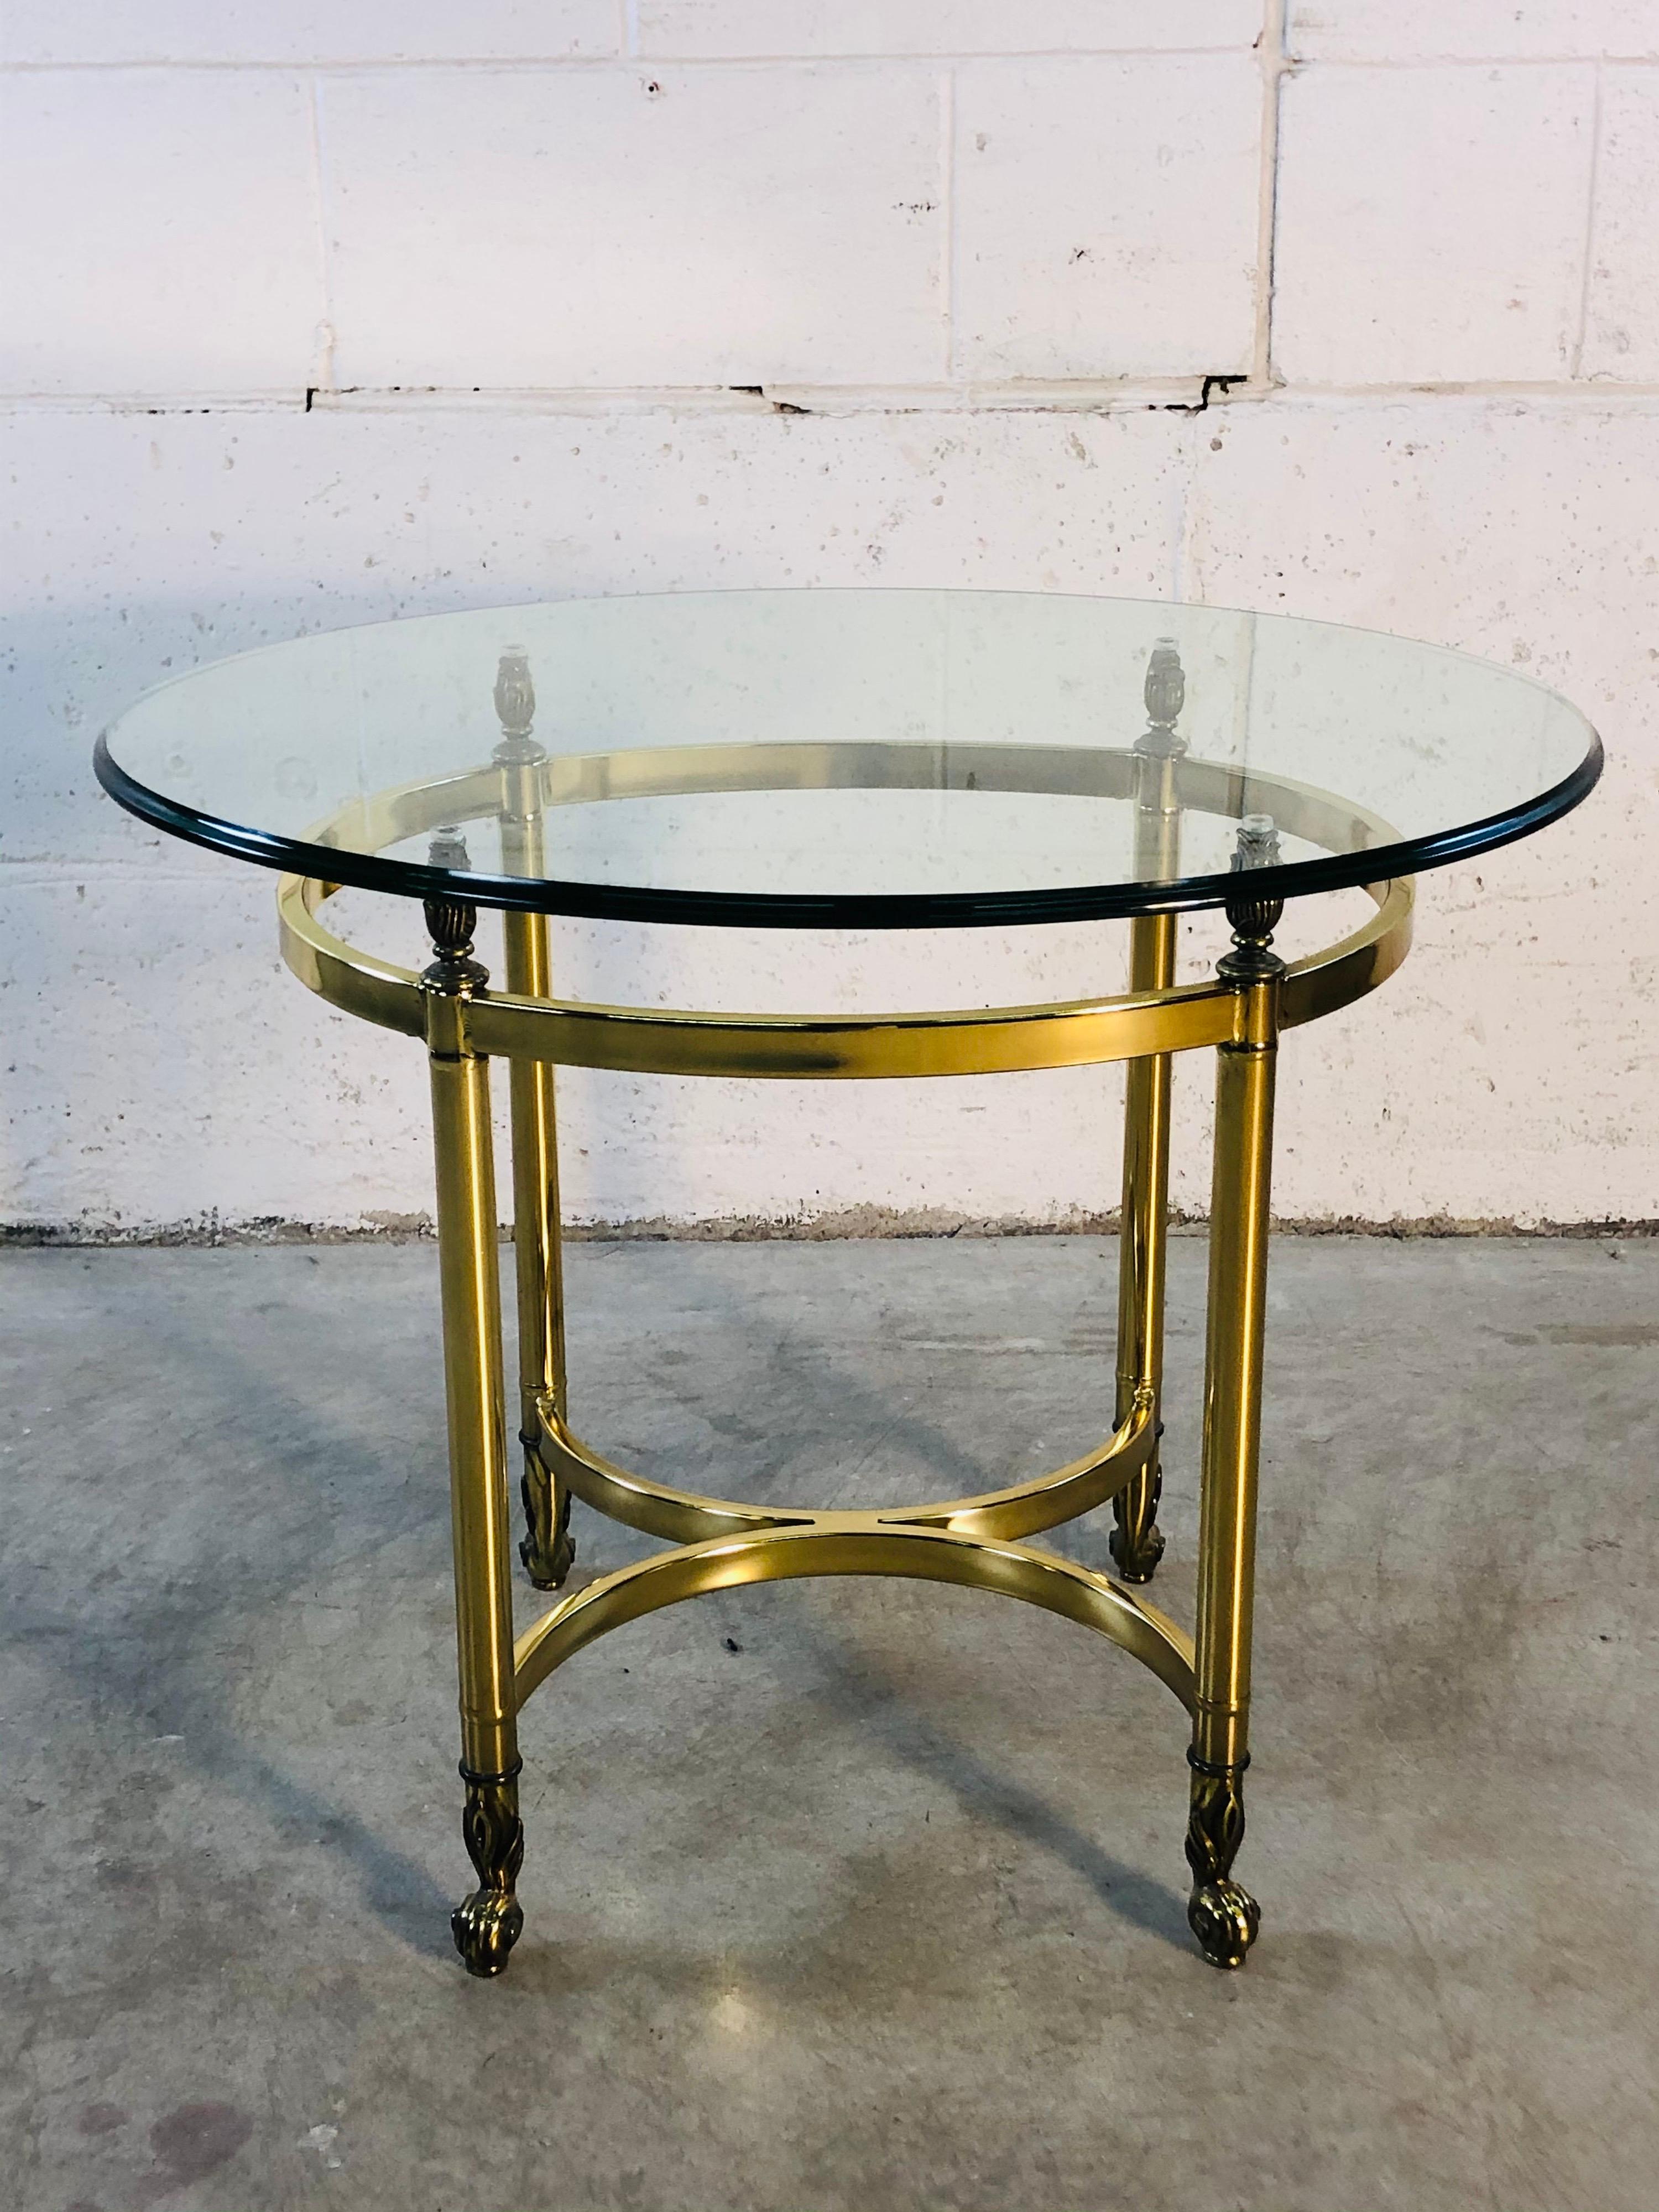 Vintage 1960s LaBarge oval brass and glass top side table with scroll accented feet. Glass top is beveled and in excellent condition. No marks.